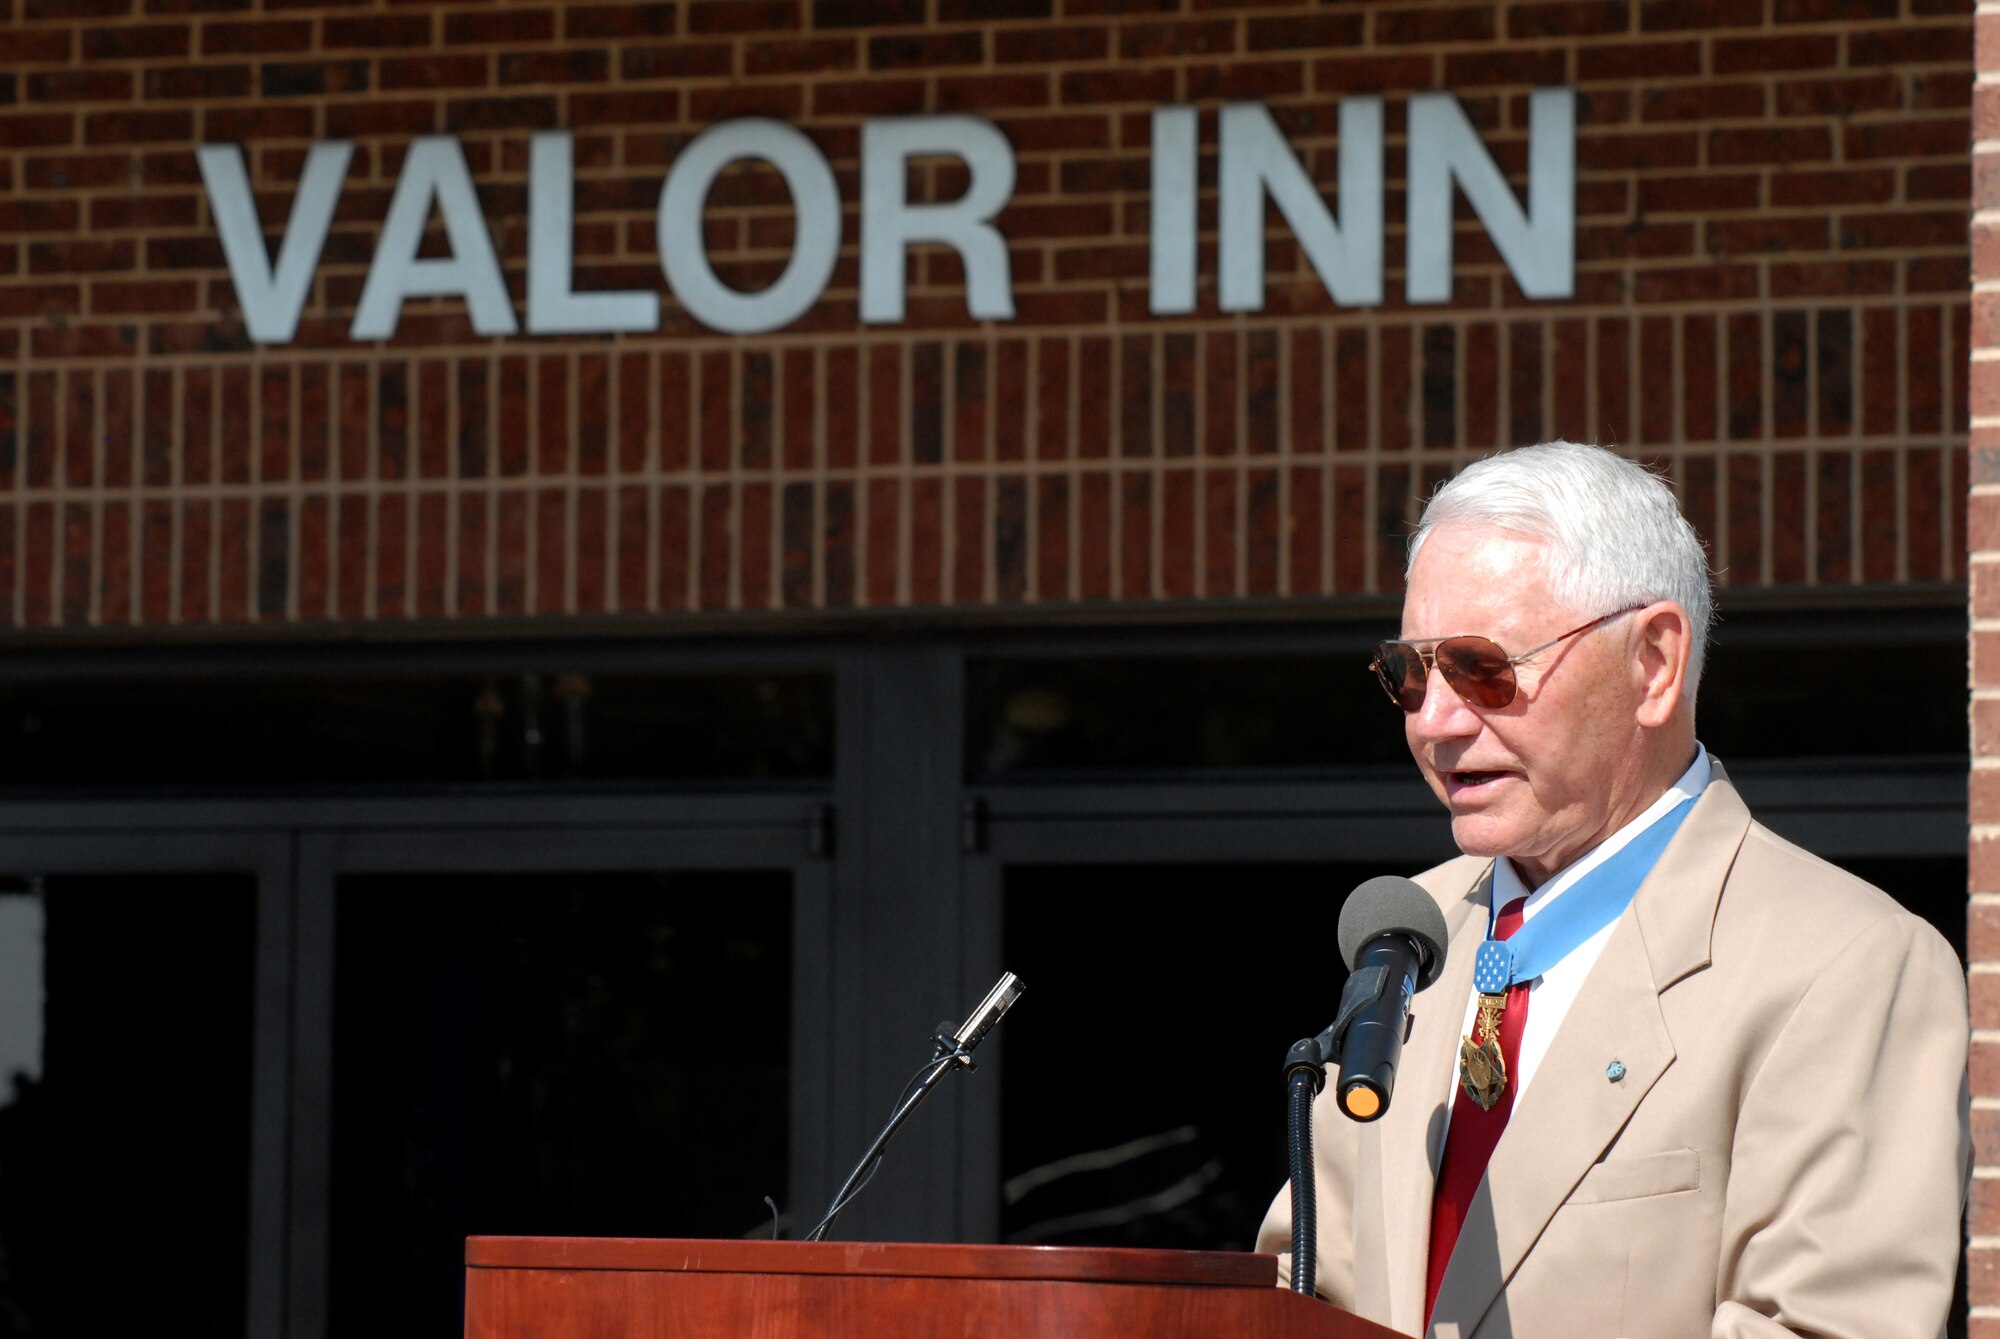 Medal of Honor recipient Col. Leo Thorsness speaks during a dedication ceremony of two buildings in honor of himself and fellow Medal of Honor recipient Col.  George E. “Bud” Day May 7 on Goodfellow AFB, Texas.  (U.S. Air Force photo/Master Sgt. Randy Mallard)